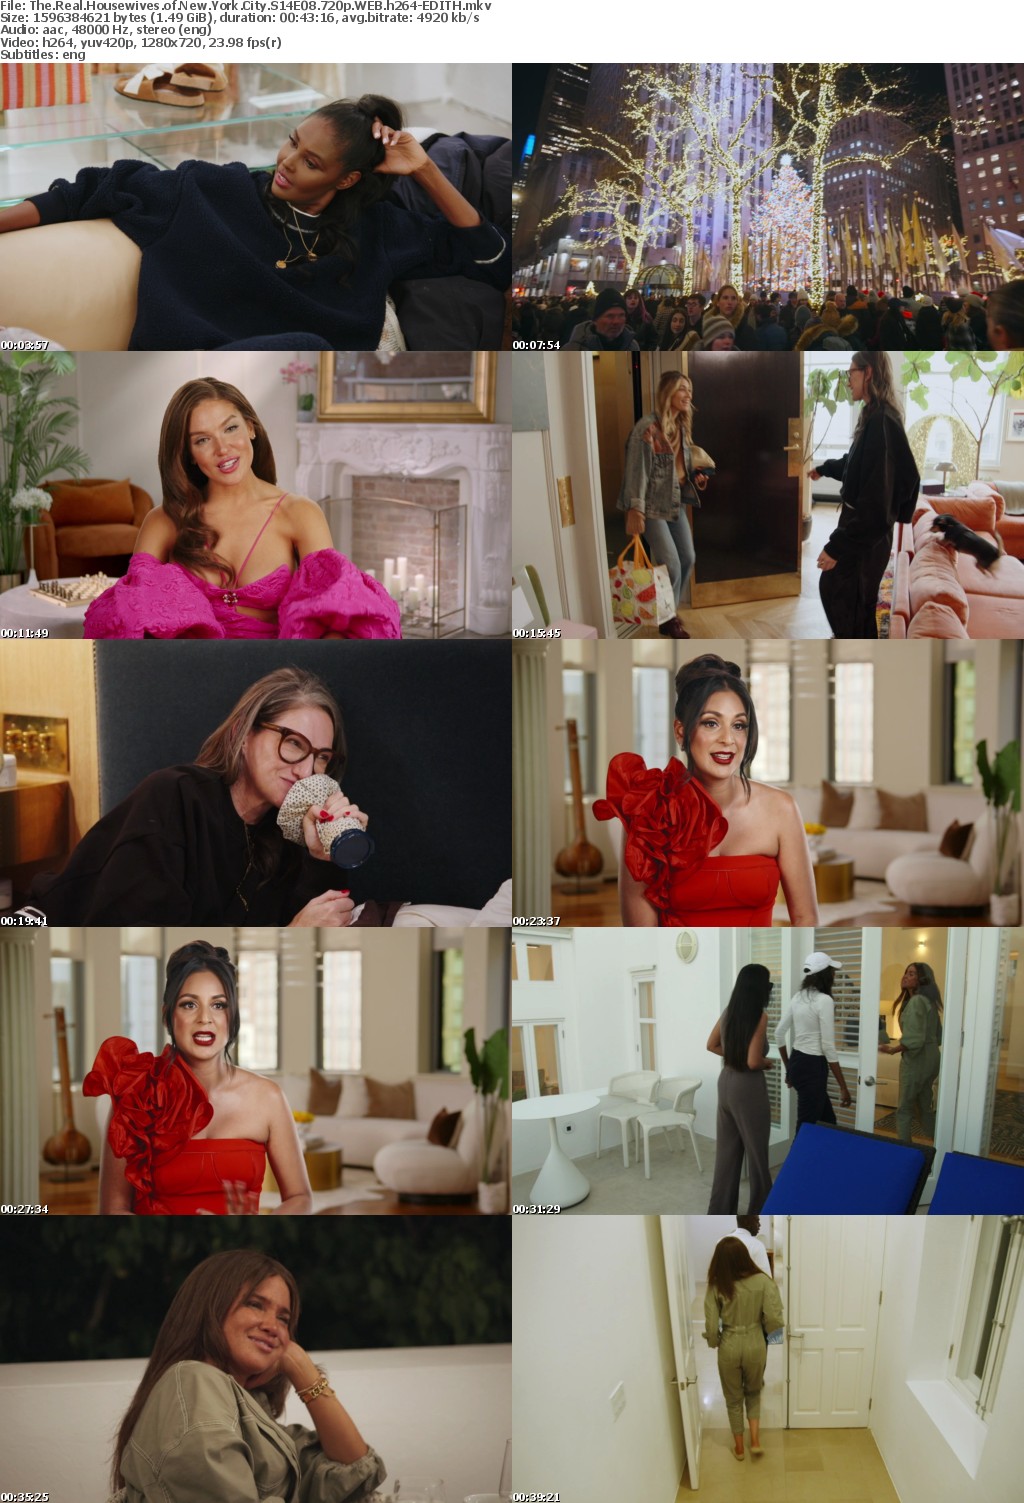 The Real Housewives of New York City S14E08 720p WEB h264-EDITH